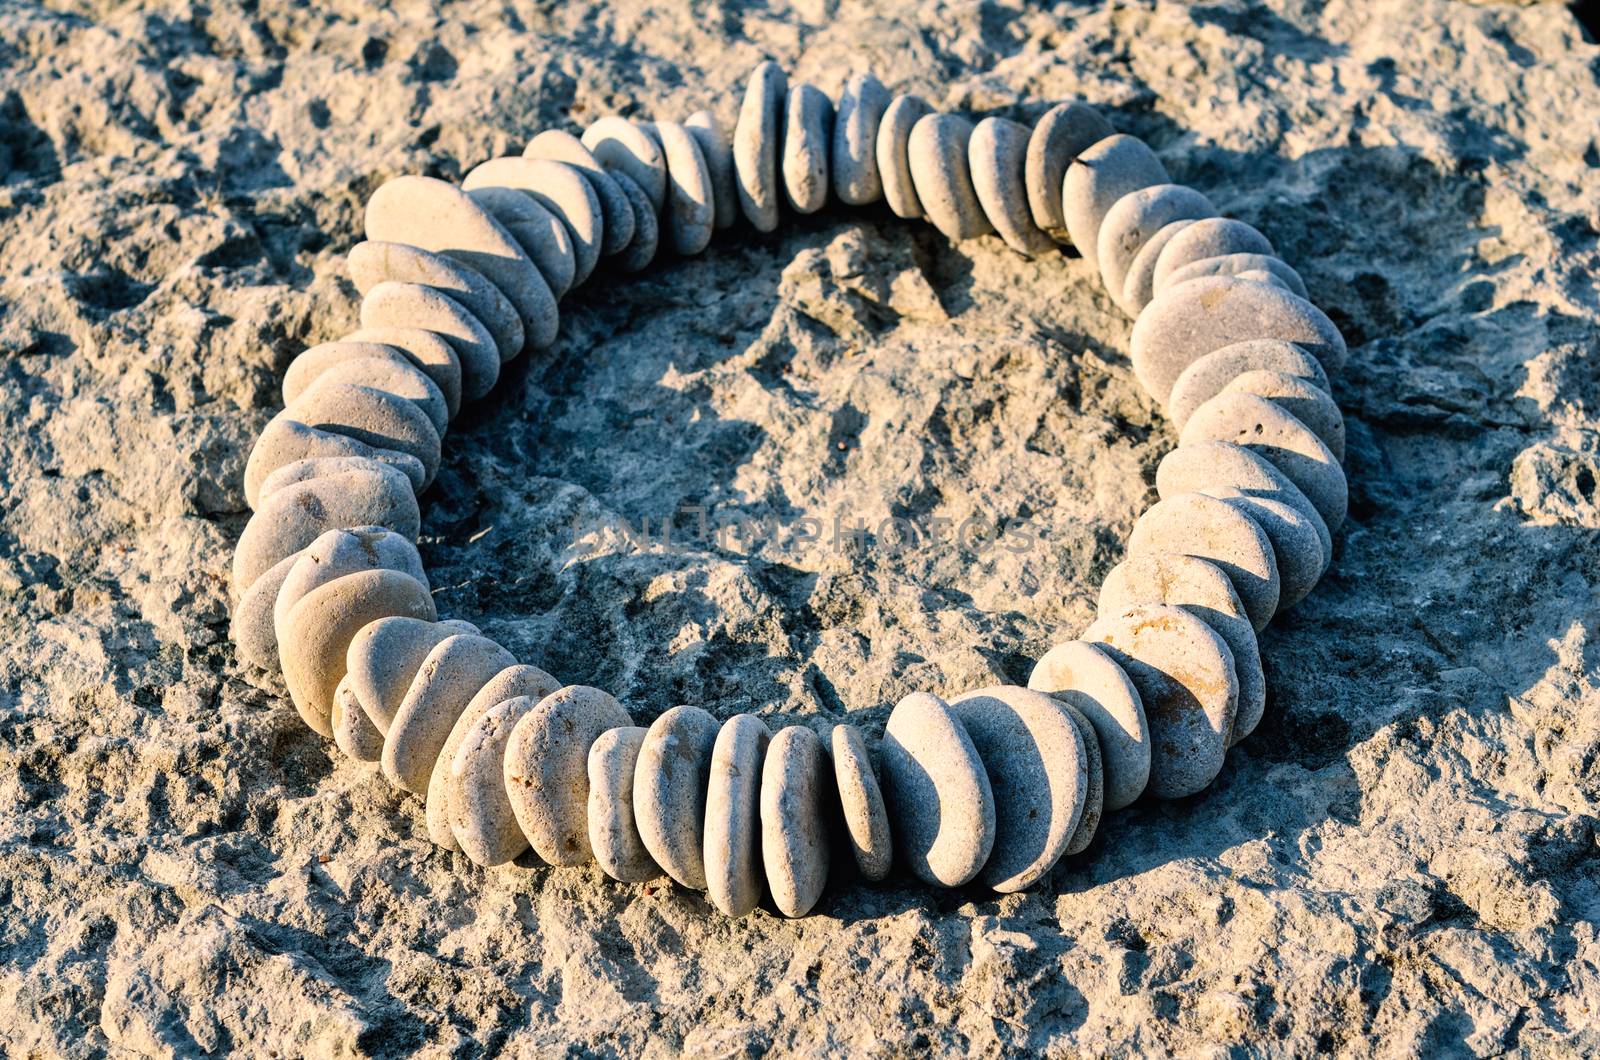 Sequence of small stones laid out in the form of a circle